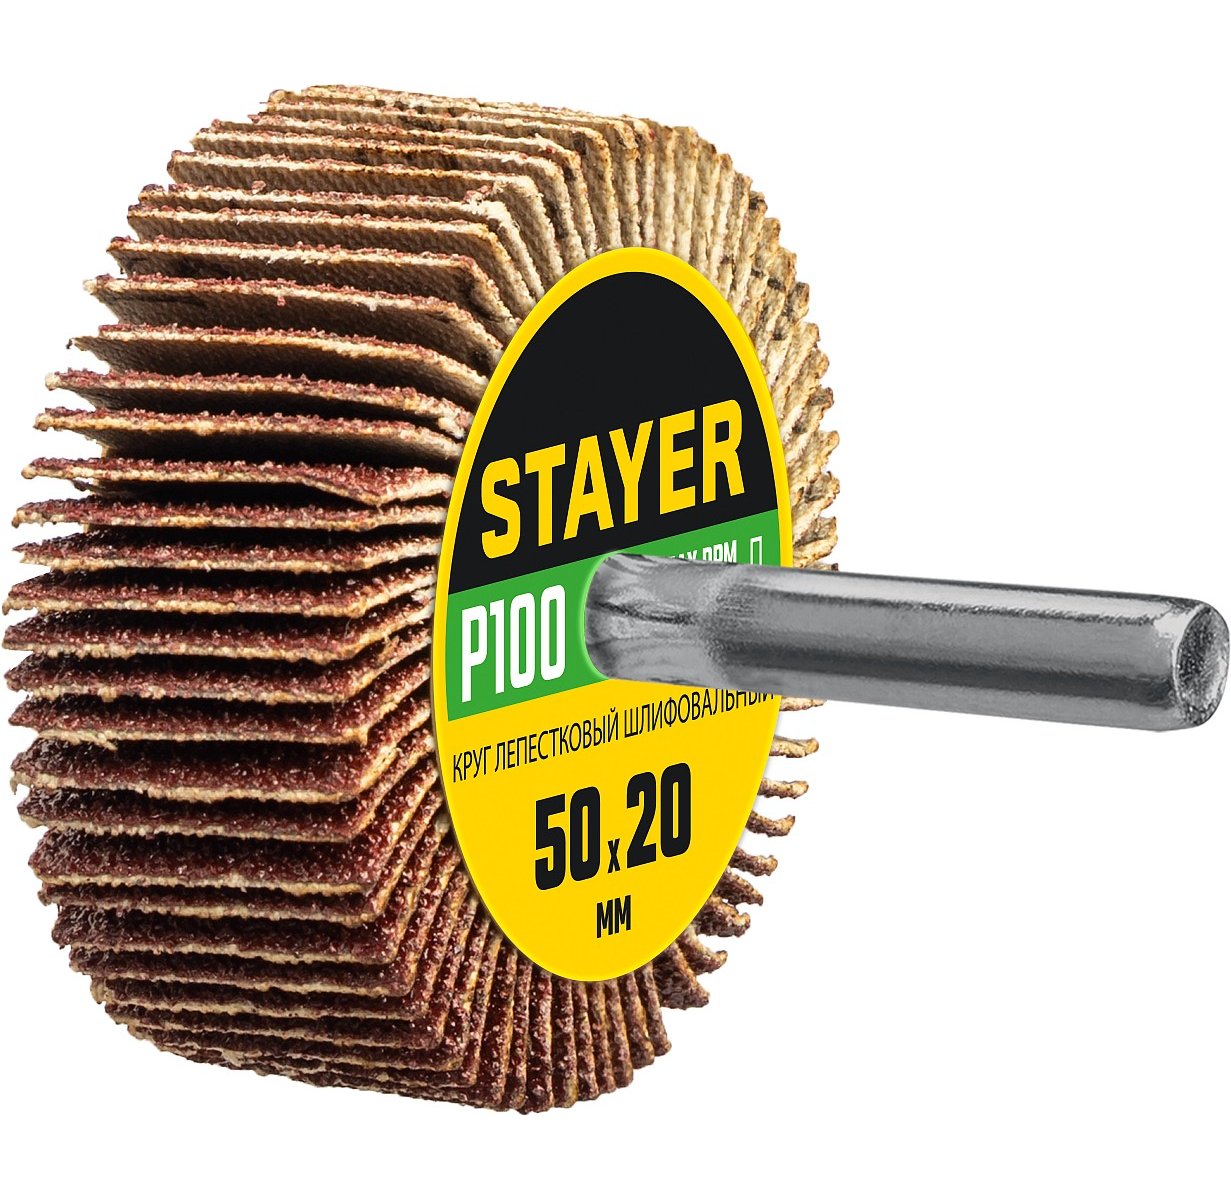 STAYER d 50x20 , P100,   ,  , (36607-100)